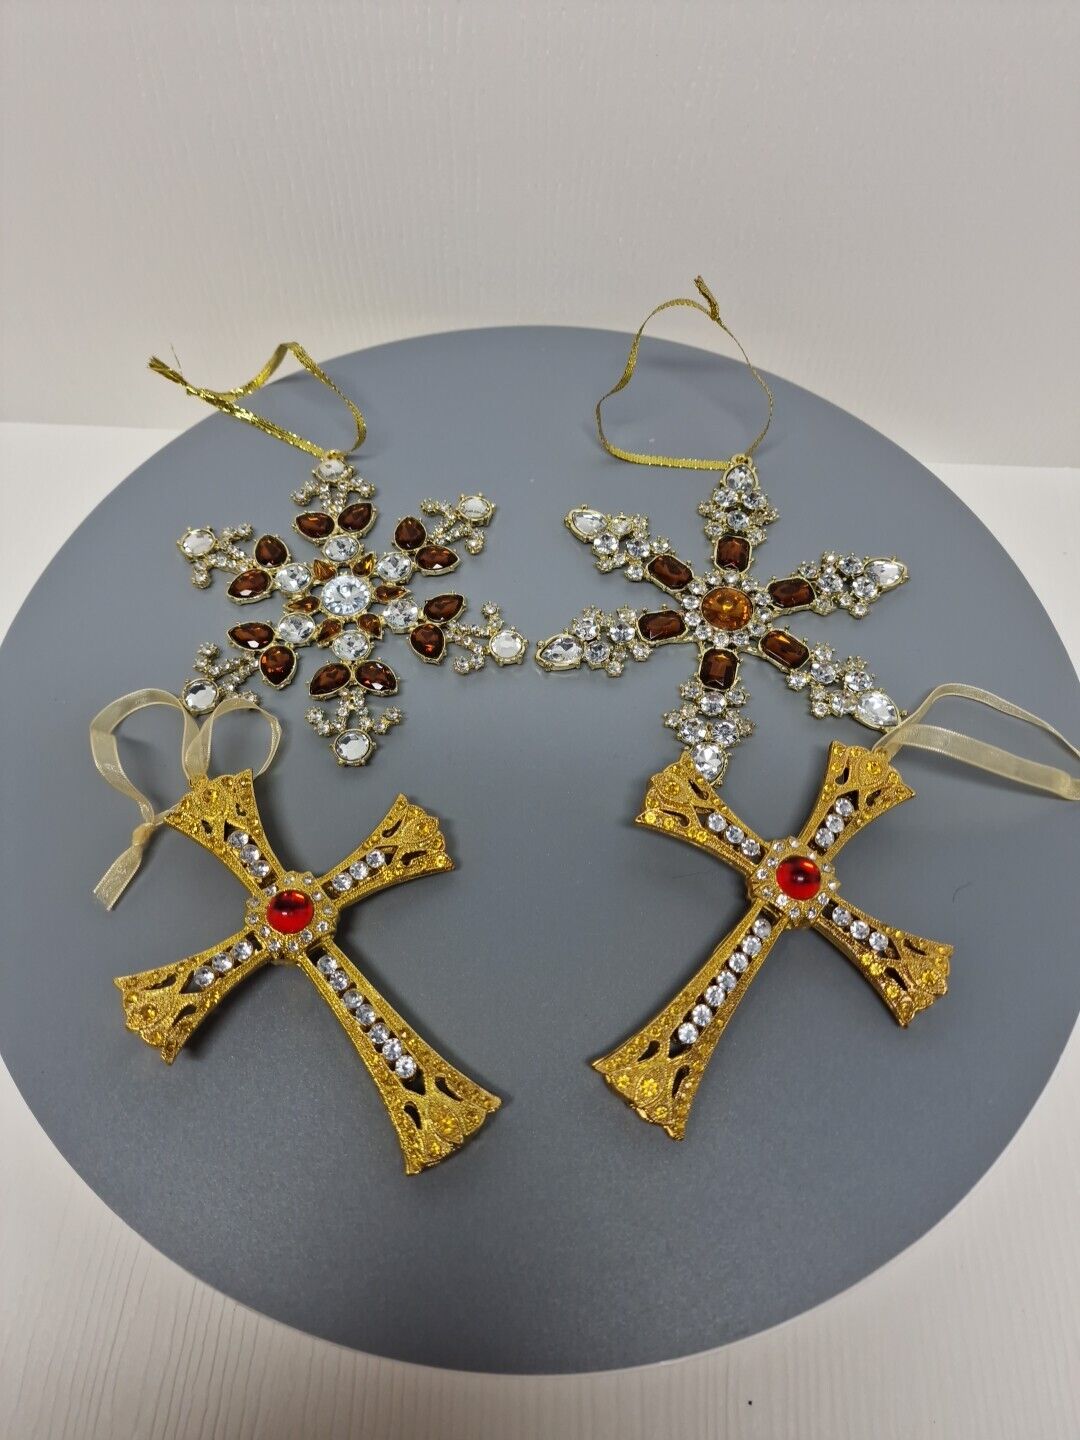 Lot Of 4 Ornate Jeweled Religious Cross And Snowflakes Christmas Ornaments,C14te